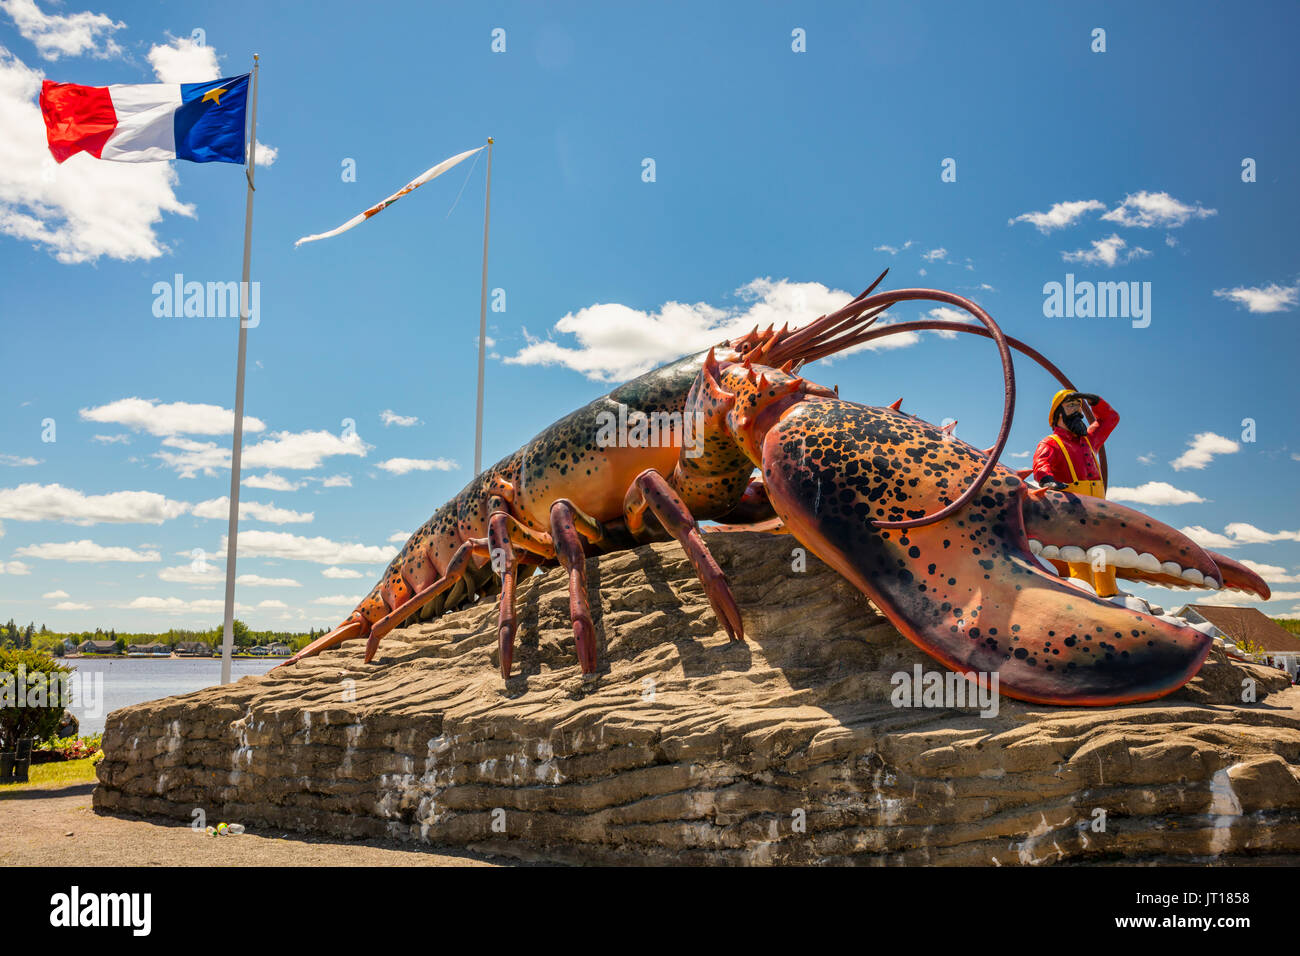 Lobster Capital of the World, Shediac is a Canadian town that boasts 'The World's Largest Lobster' weighing in at 90-tonnes. Stock Photo